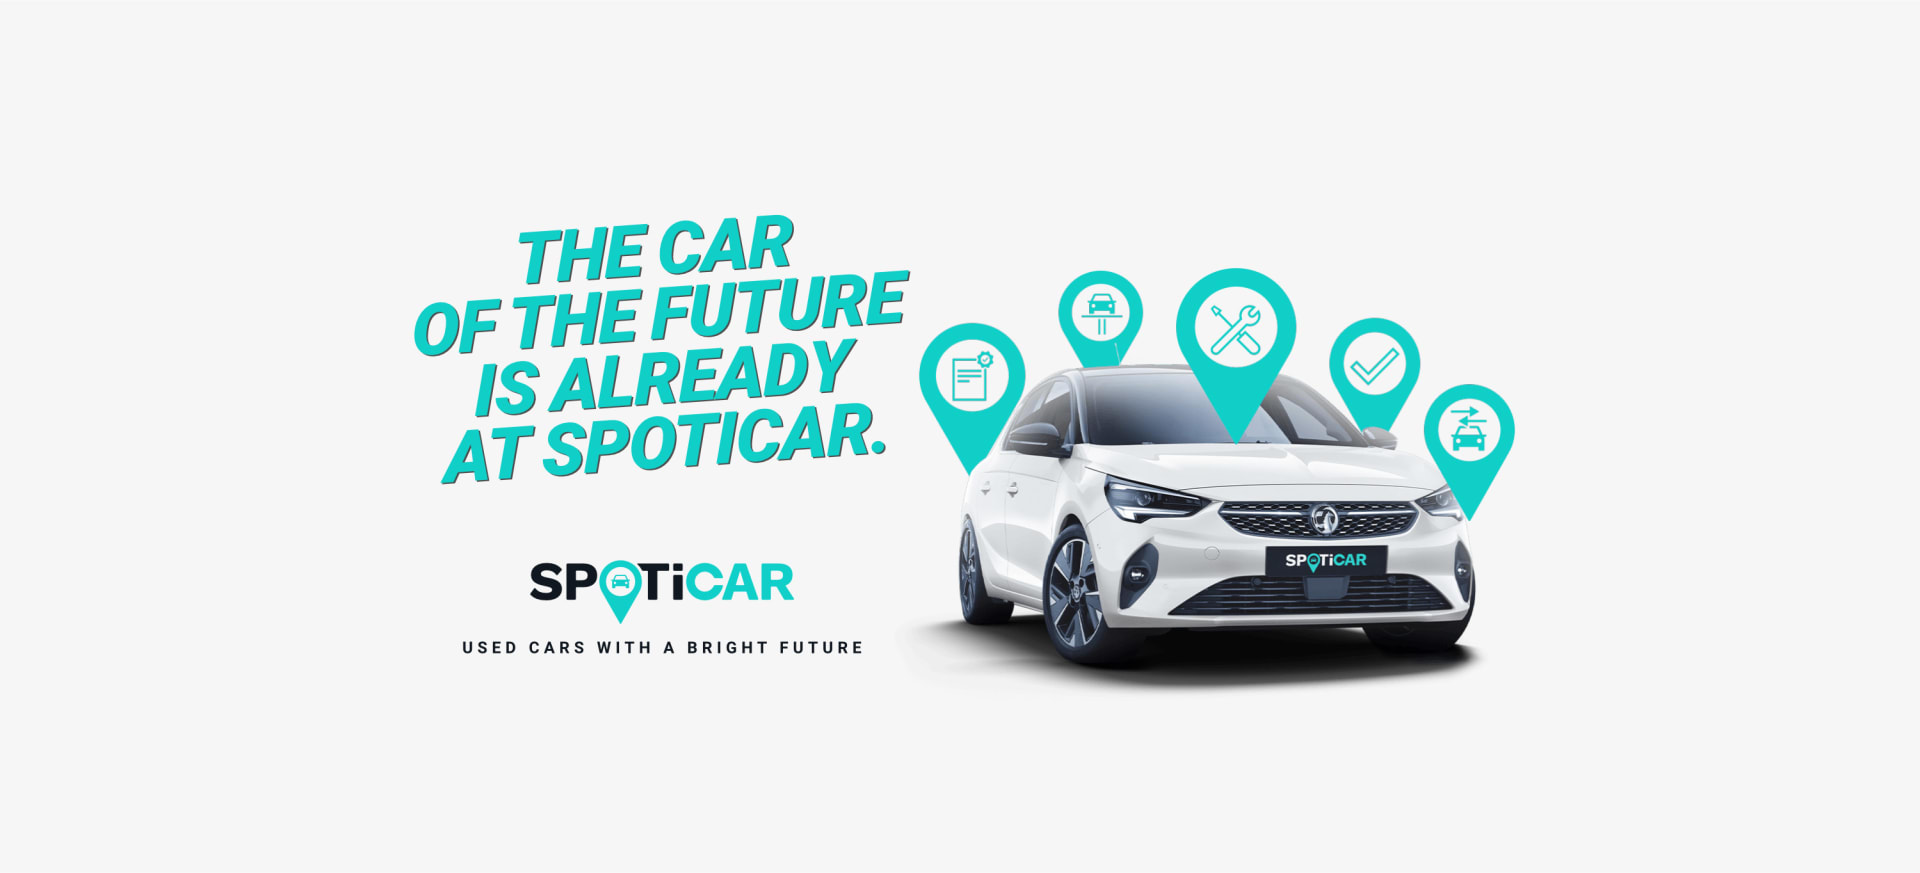 Spoticar Used Cars from Lanehouse Vauxhall